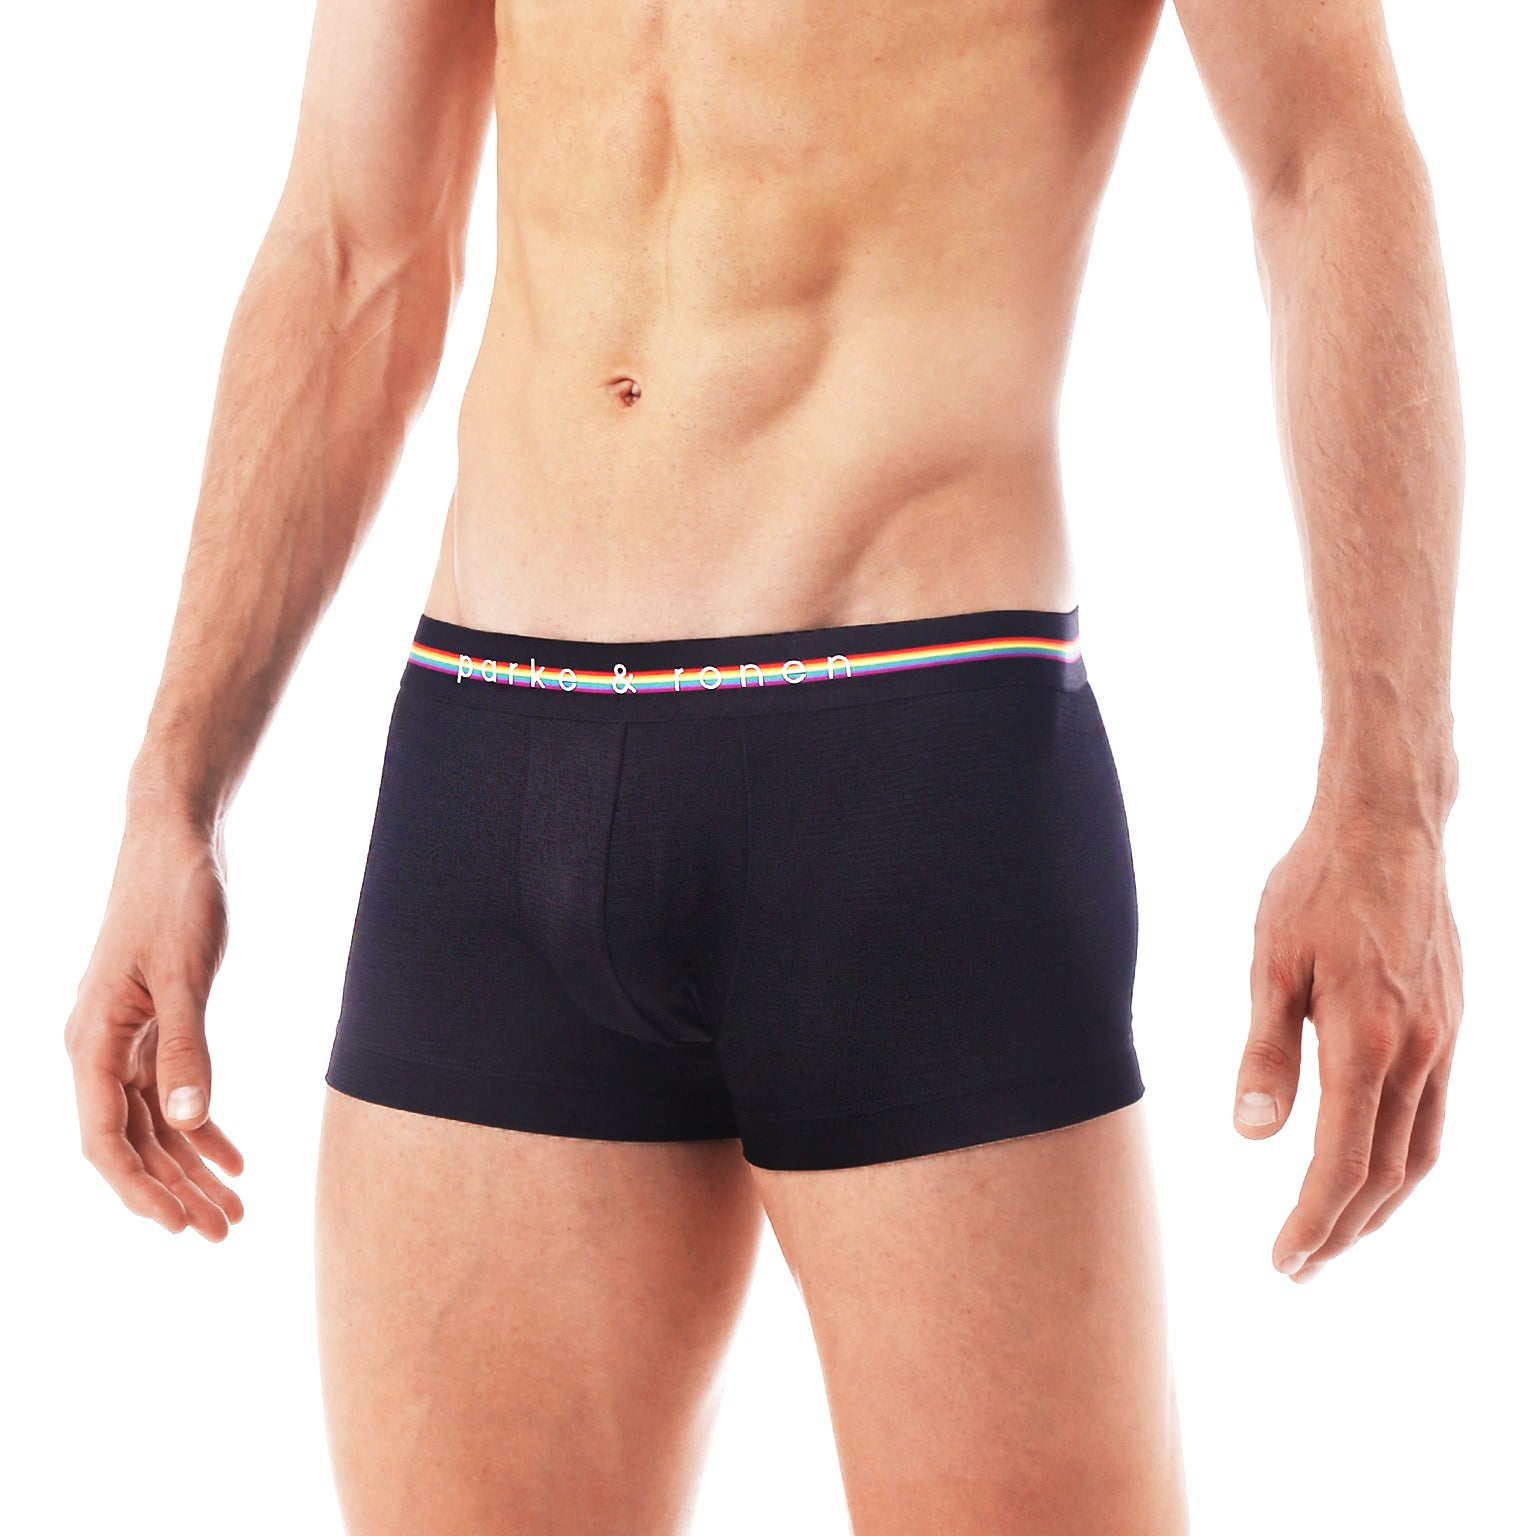 LIMITED PRIDE EDITION- Black Heather Mesh Low Rise Trunk